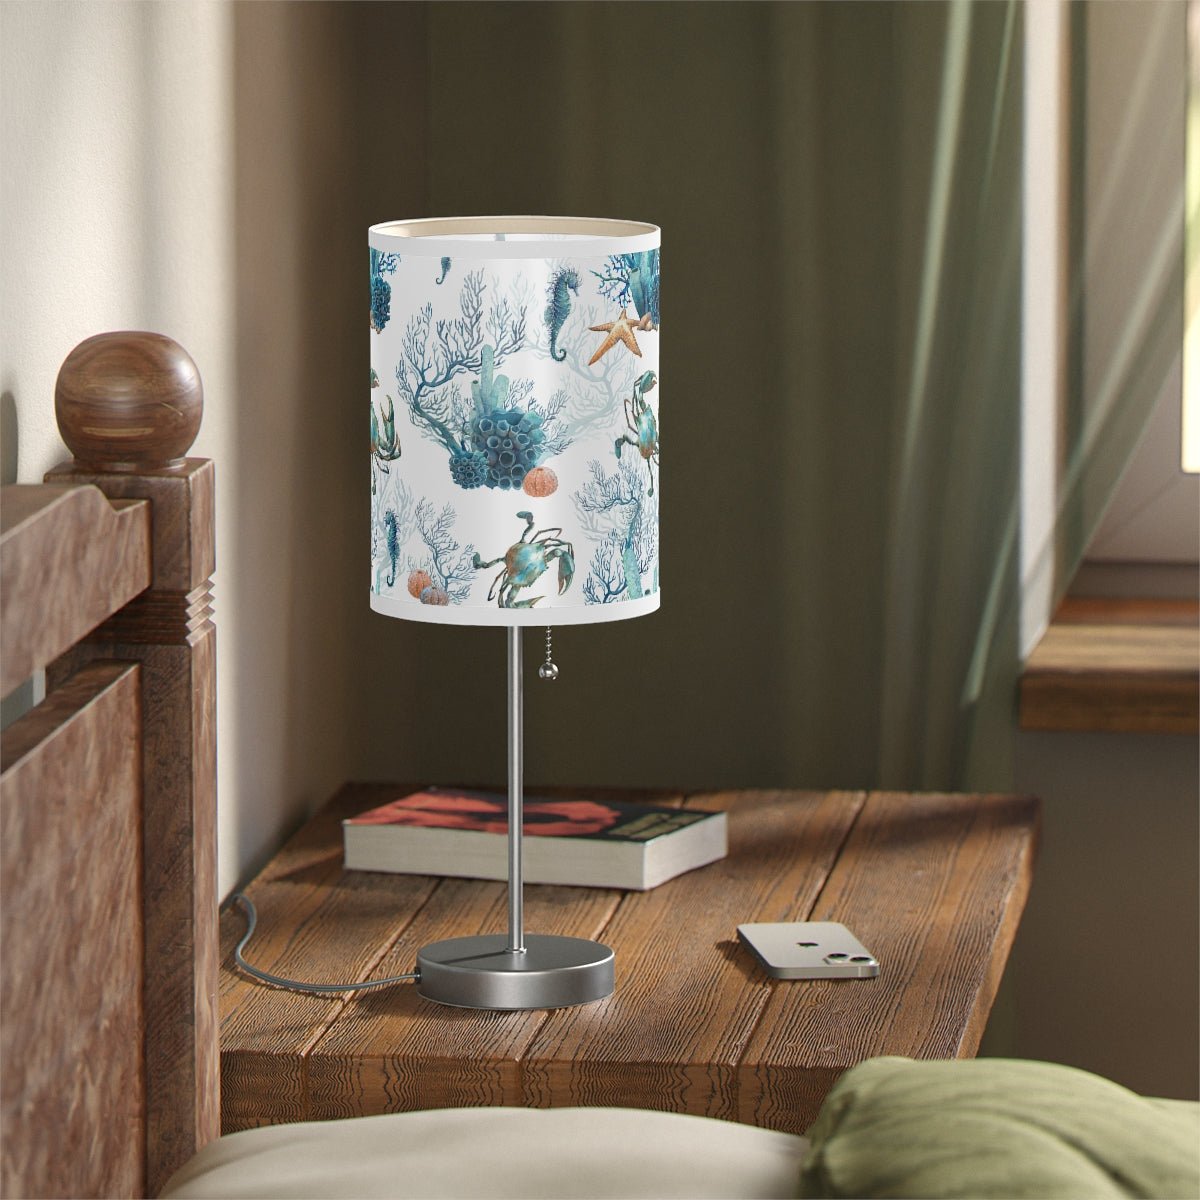 Watercolor Coral Reef Table Lamp - Puffin Lime